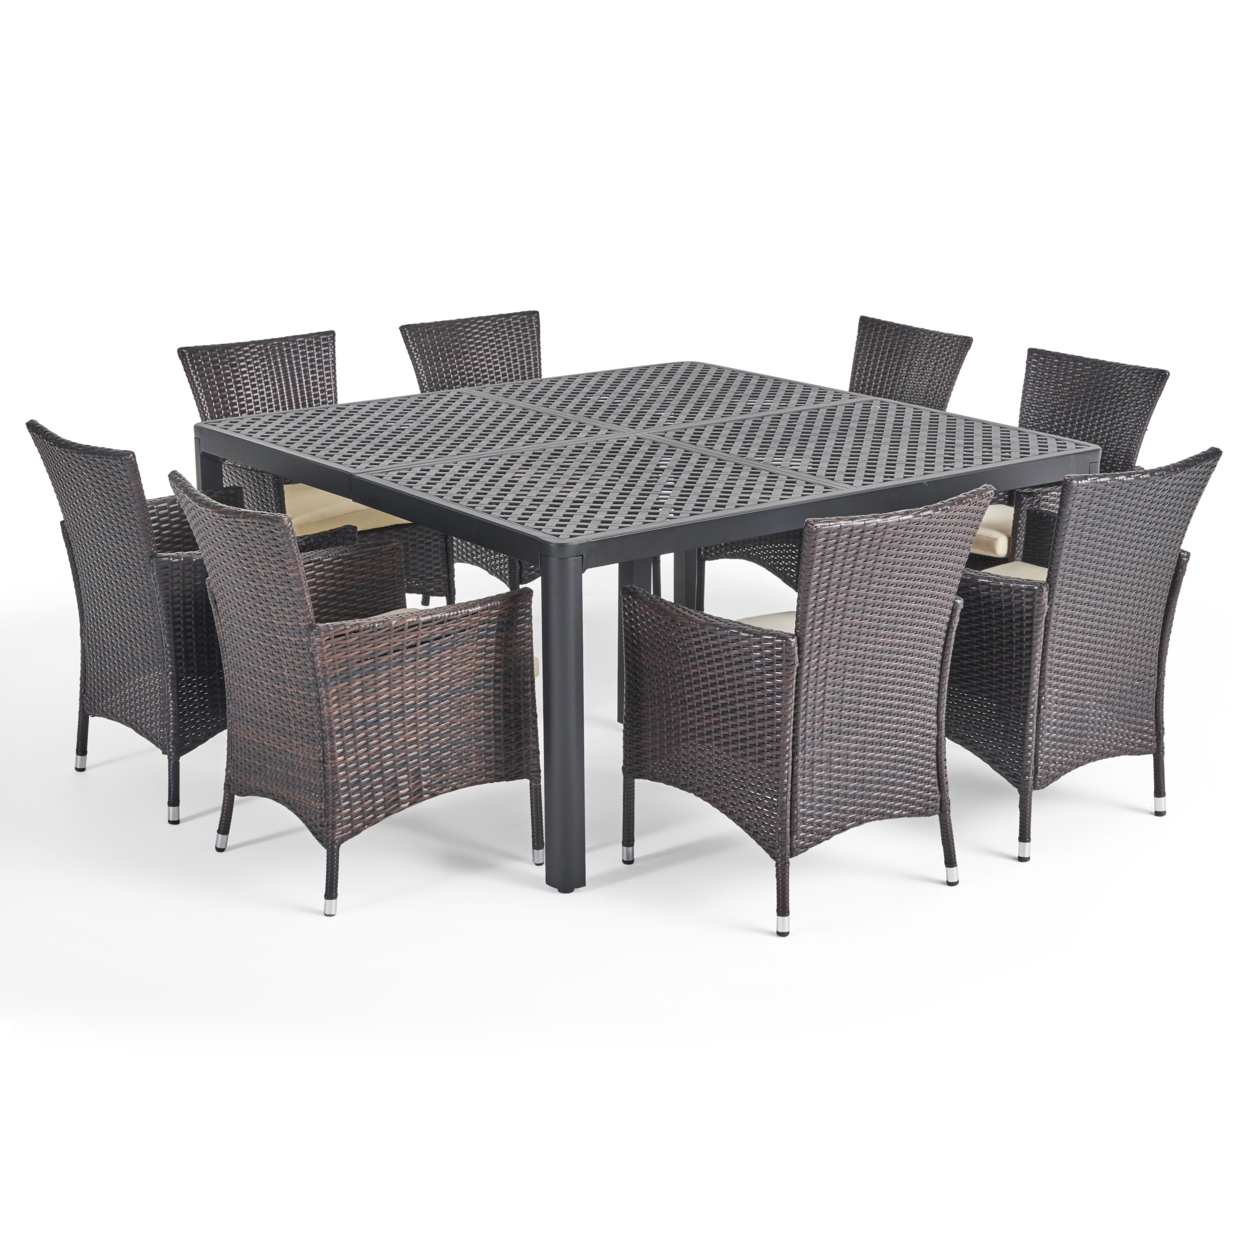 Nelly Outdoor Aluminum And Wicker 8 Seater Dining Set - Antique Matte Black + Multibrown + Beige